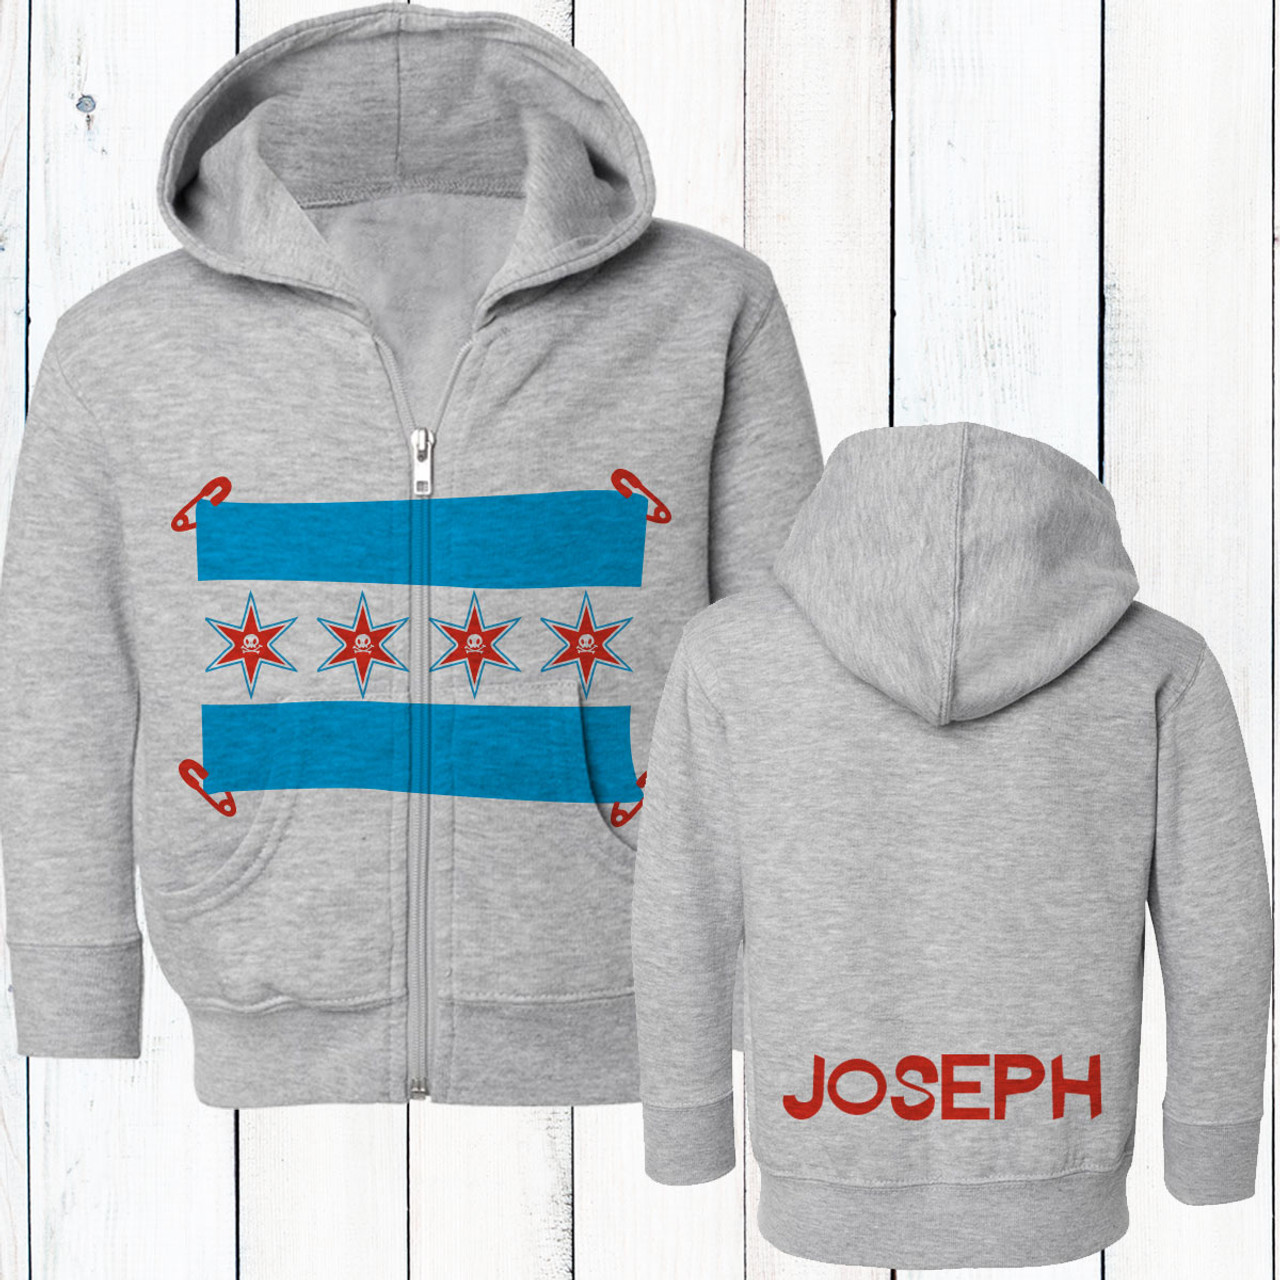 Personalized Kids Zip up Personalized Kids Pullover 